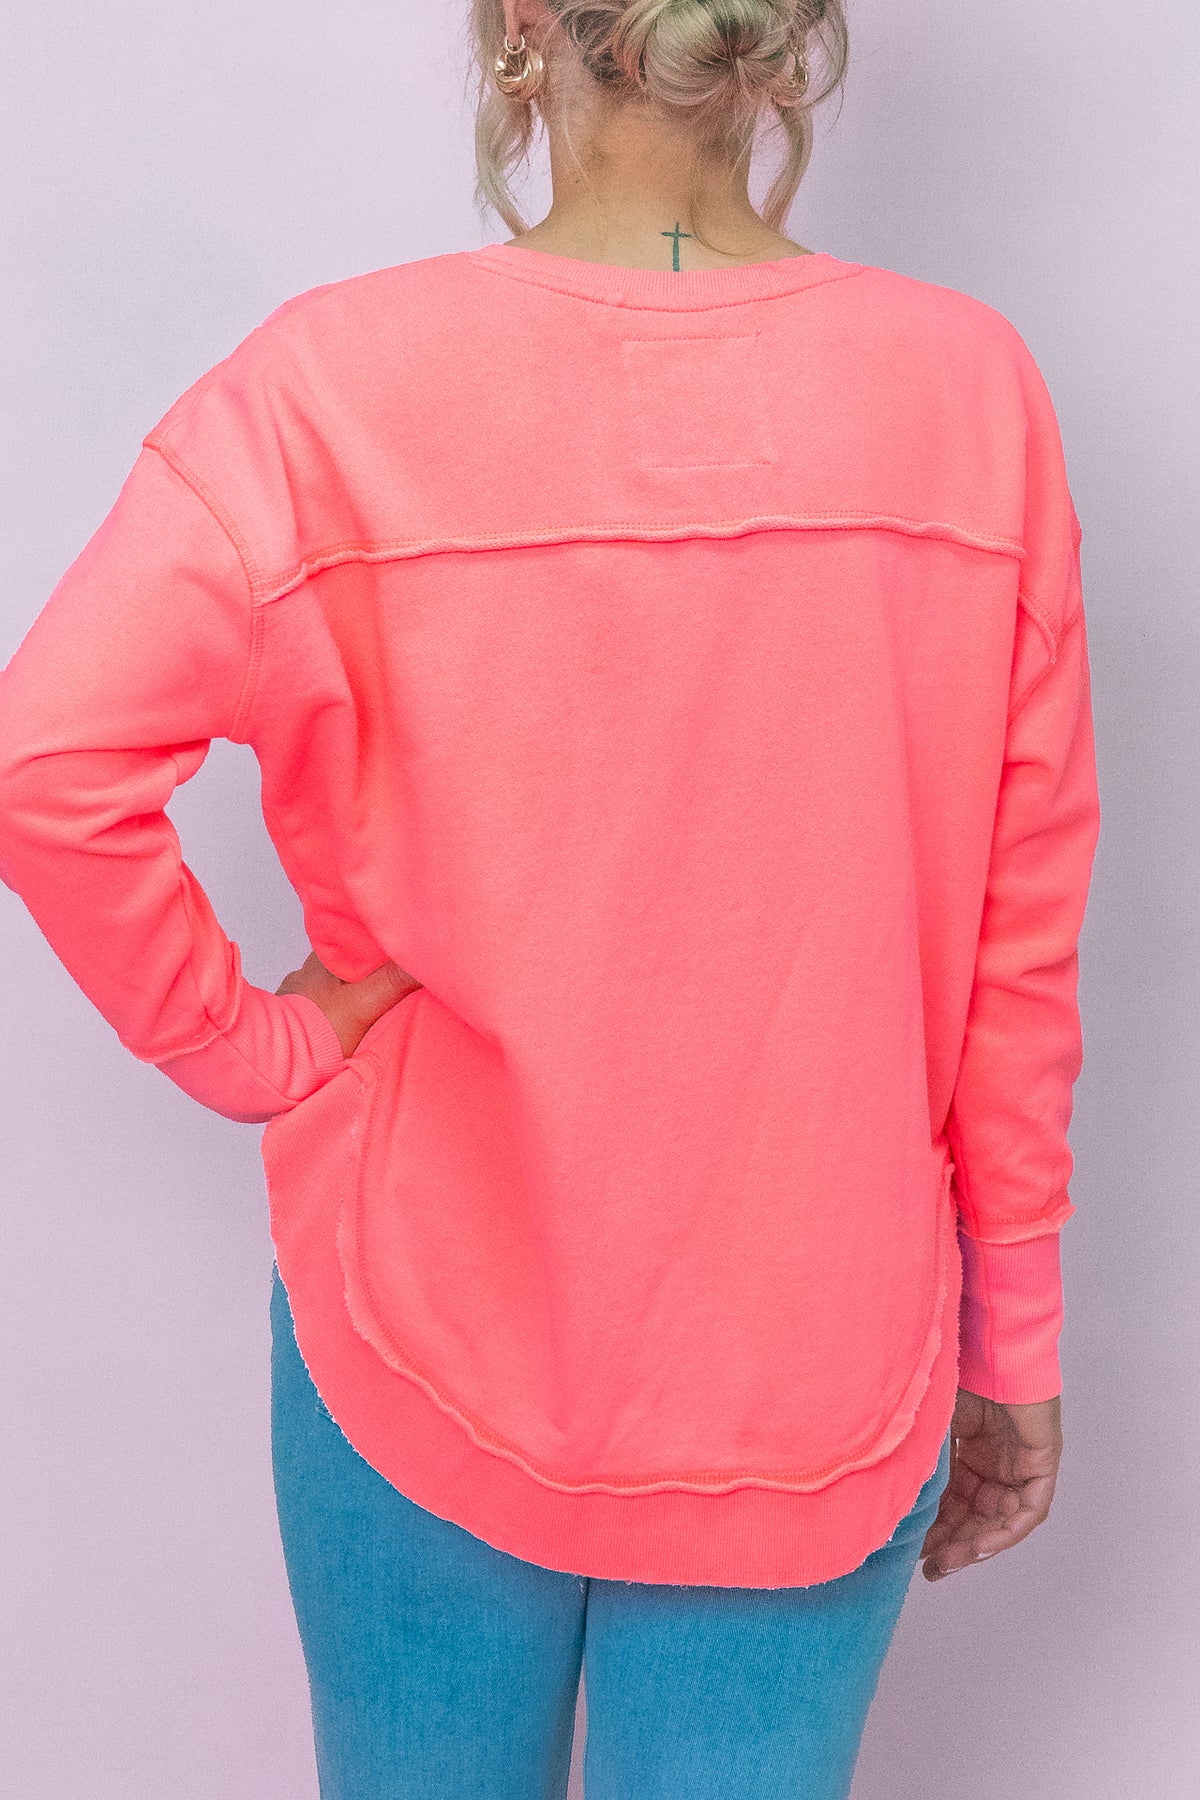 Simplified Crew in Neon Pink - Foxwood